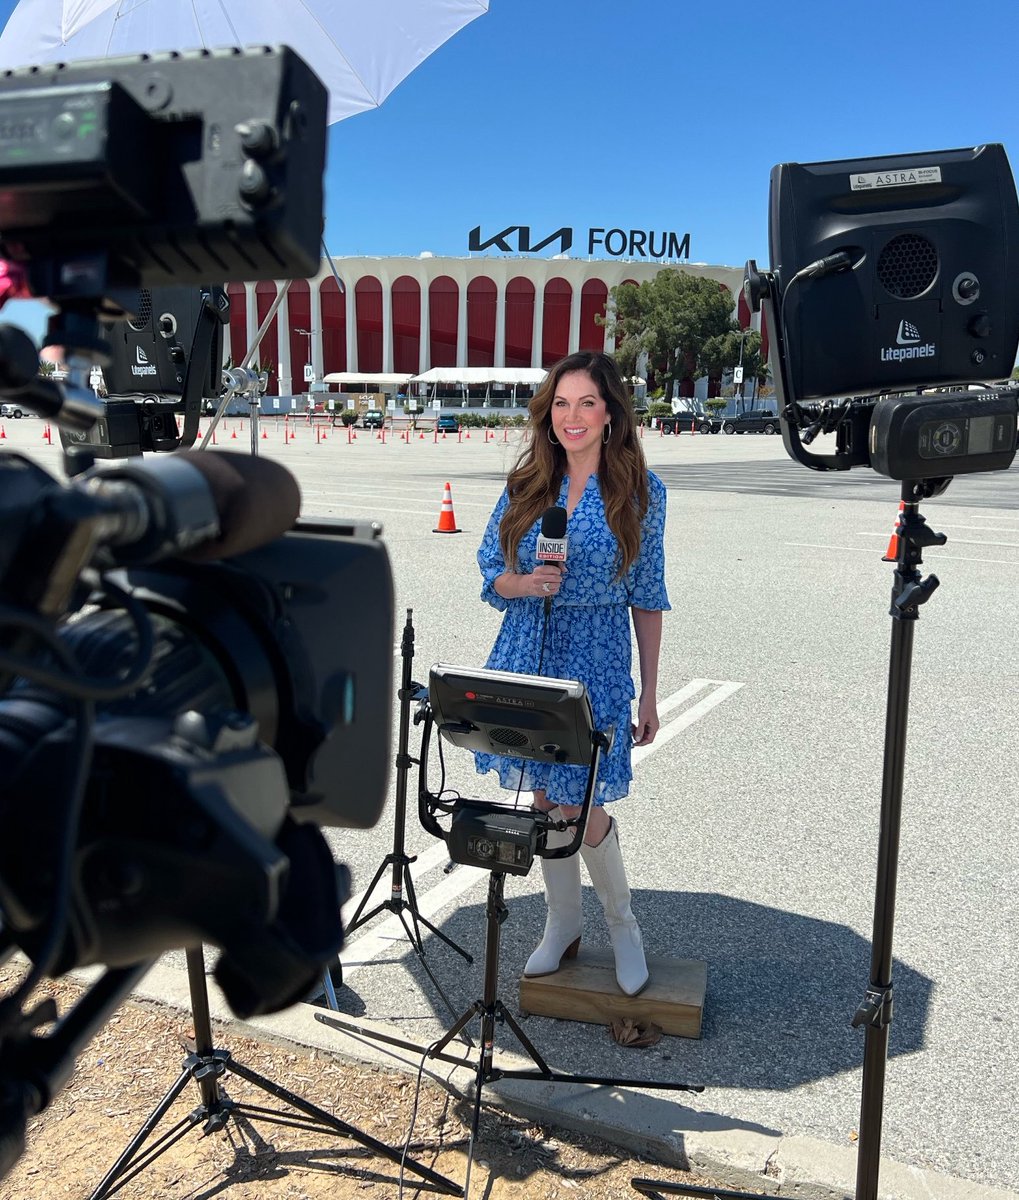 What was the joke @TomBrady thought went *too far* at his roast last night on @Netflix? (Hint: It wasn’t about HIM!) I’m reporting from the @thekiaforum for @InsideEdition TODAY